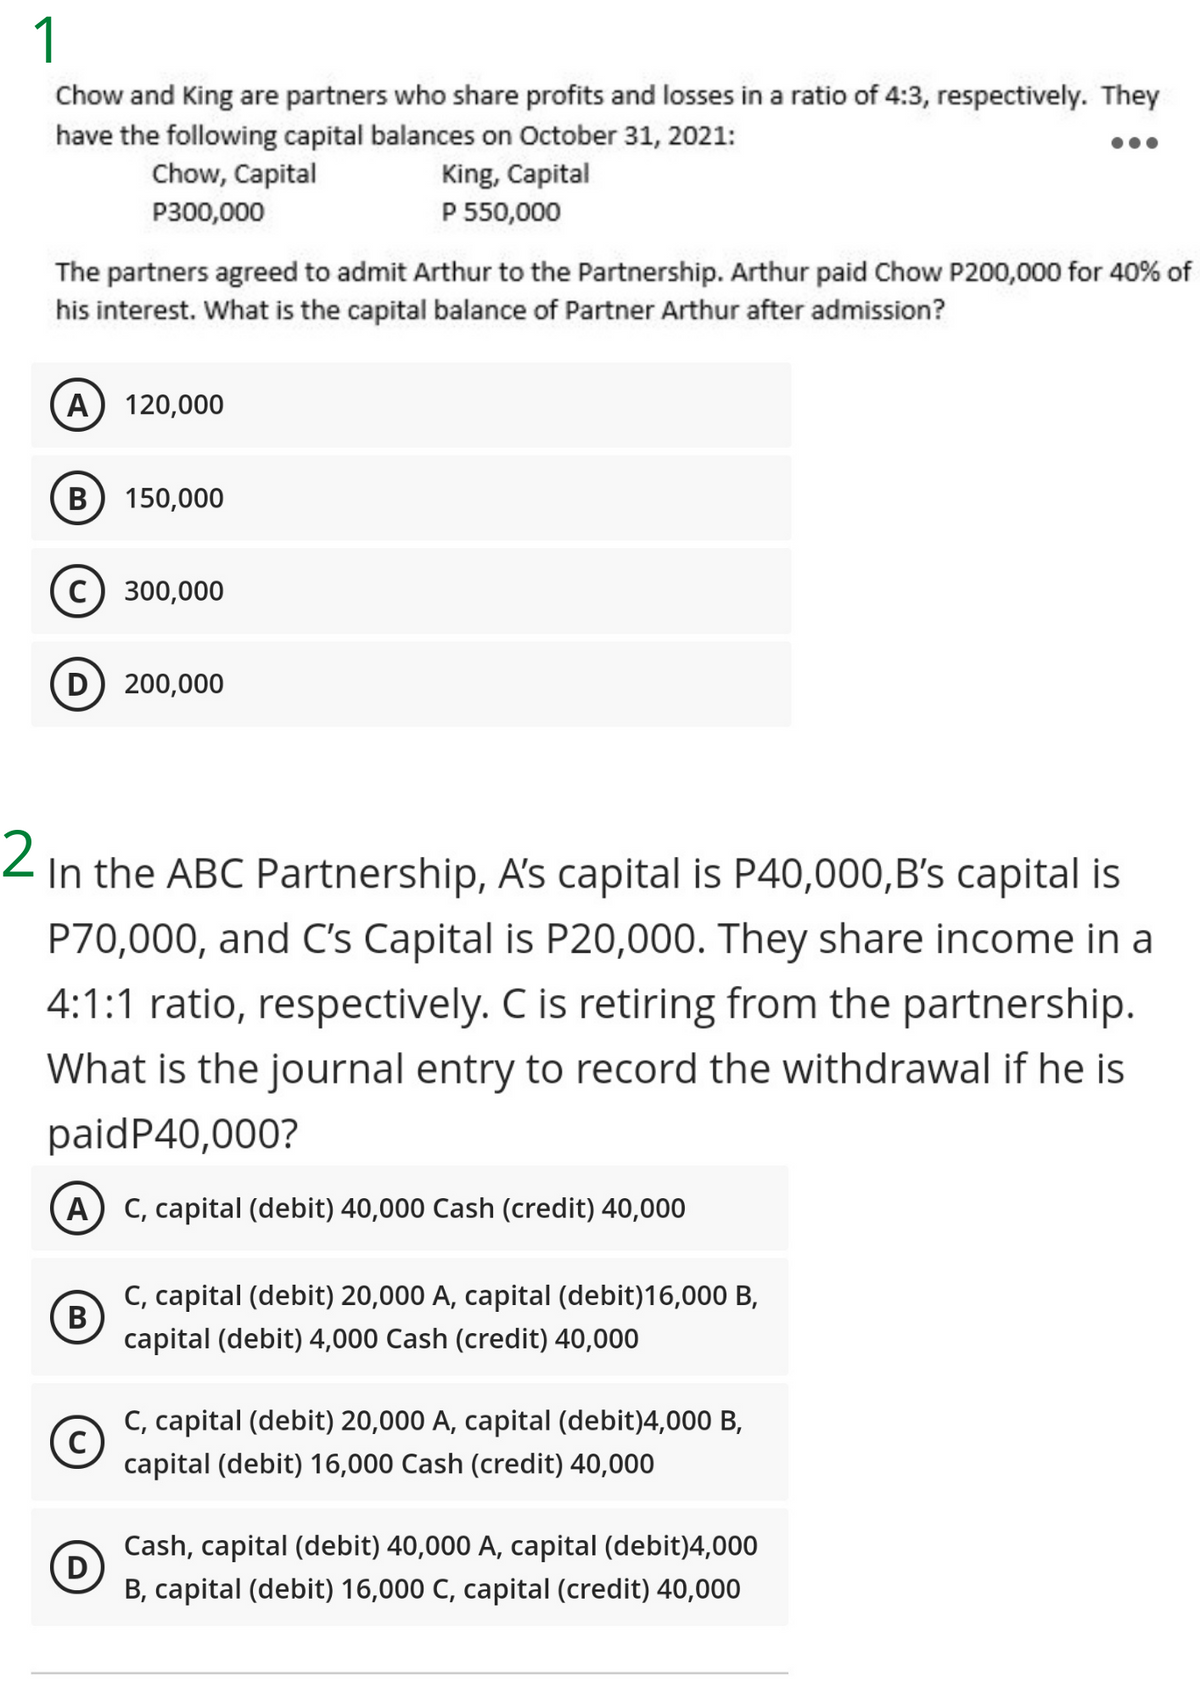 1
Chow and King are partners who share profits and losses in a ratio of 4:3, respectively. They
have the following capital balances on October 31, 2021:
Chow, Capital
King, Capital
P 550,000
P300,000
The partners agreed to admit Arthur to the Partnership. Arthur paid Chow P200,000 for 40% of
his interest. What is the capital balance of Partner Arthur after admission?
A) 120,000
В
150,000
с) 300,000
D 200,000
Z In the ABC Partnership, A's capital is P40,000,B's capital is
P70,000, and C's Capital is P20,000. They share income in a
4:1:1 ratio, respectively. C is retiring from the partnership.
What is the journal entry to record the withdrawal if he is
paidP40,000?
A C, capital (debit) 40,000 Cash (credit) 40,000
C, capital (debit) 20,000 A, capital (debit)16,000 B,
В
capital (debit) 4,000 Cash (credit) 40,000
C, capital (debit) 20,000 A, capital (debit)4,000 B,
C
capital (debit) 16,000 Cash (credit) 40,000
Cash, capital (debit) 40,000 A, capital (debit)4,000
D
B, capital (debit) 16,000 C, capital (credit) 40,000
